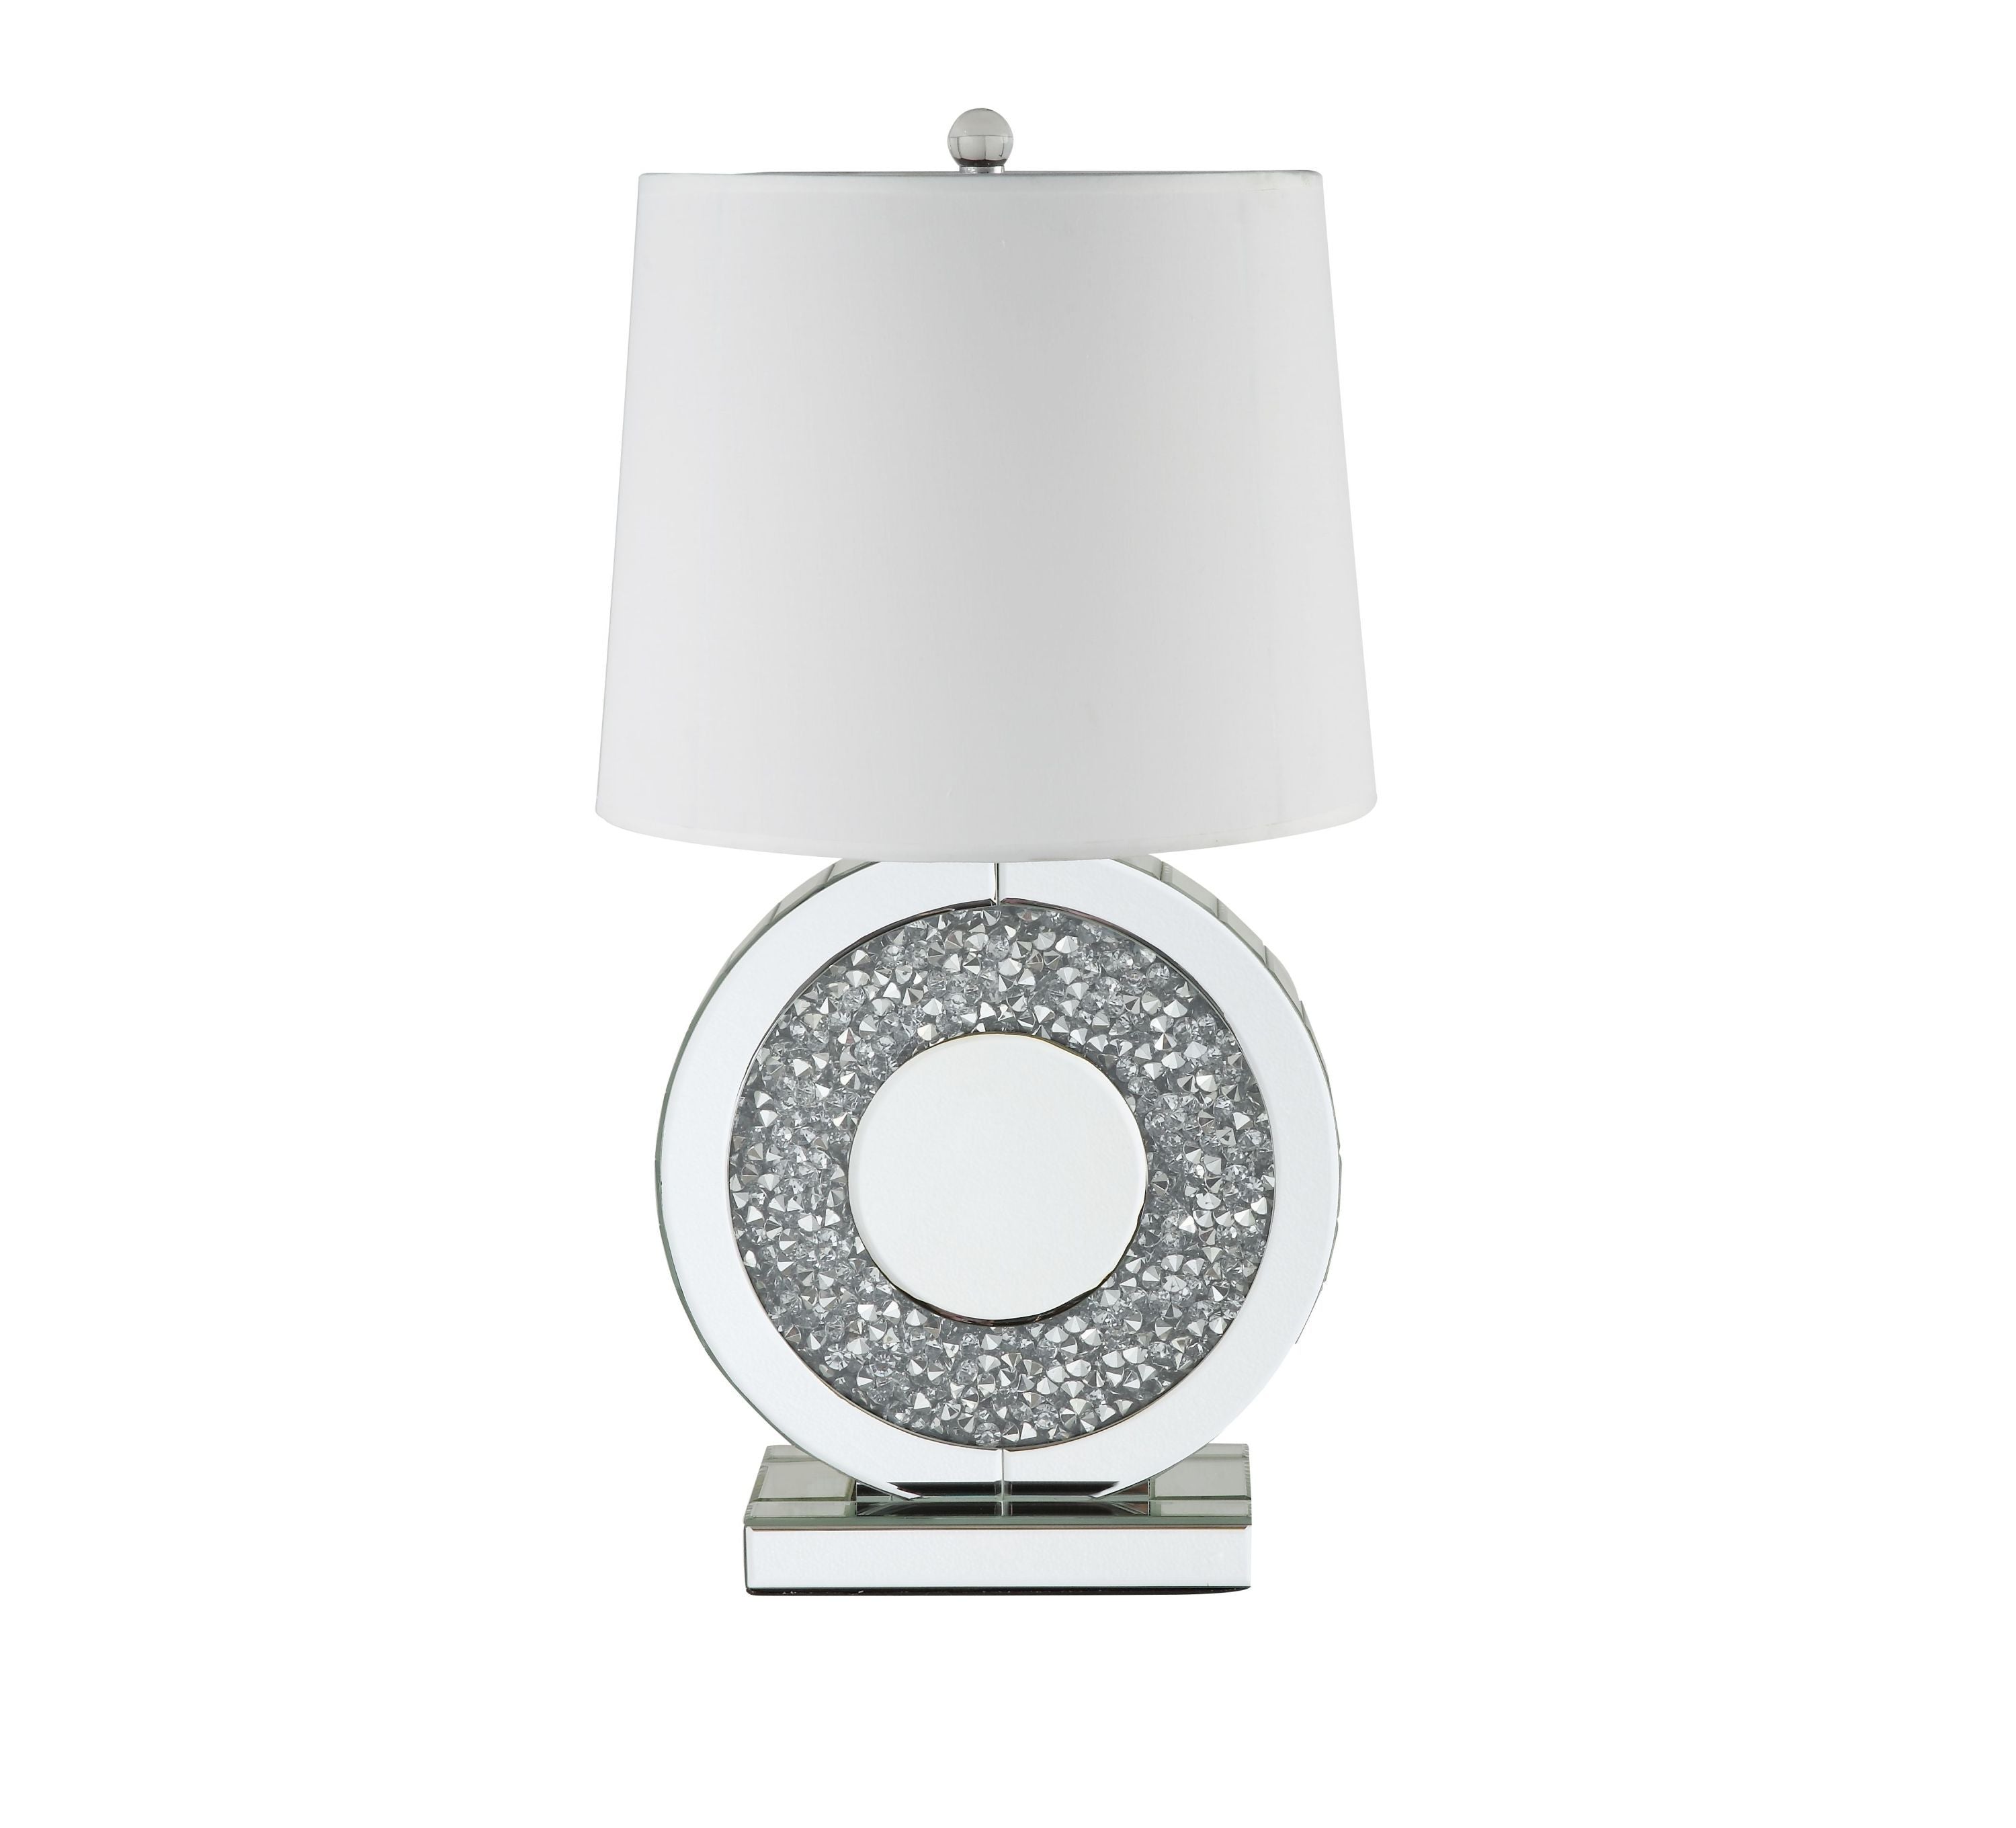 Silver Round Table Lamp, Mirrored & Faux Diamonds